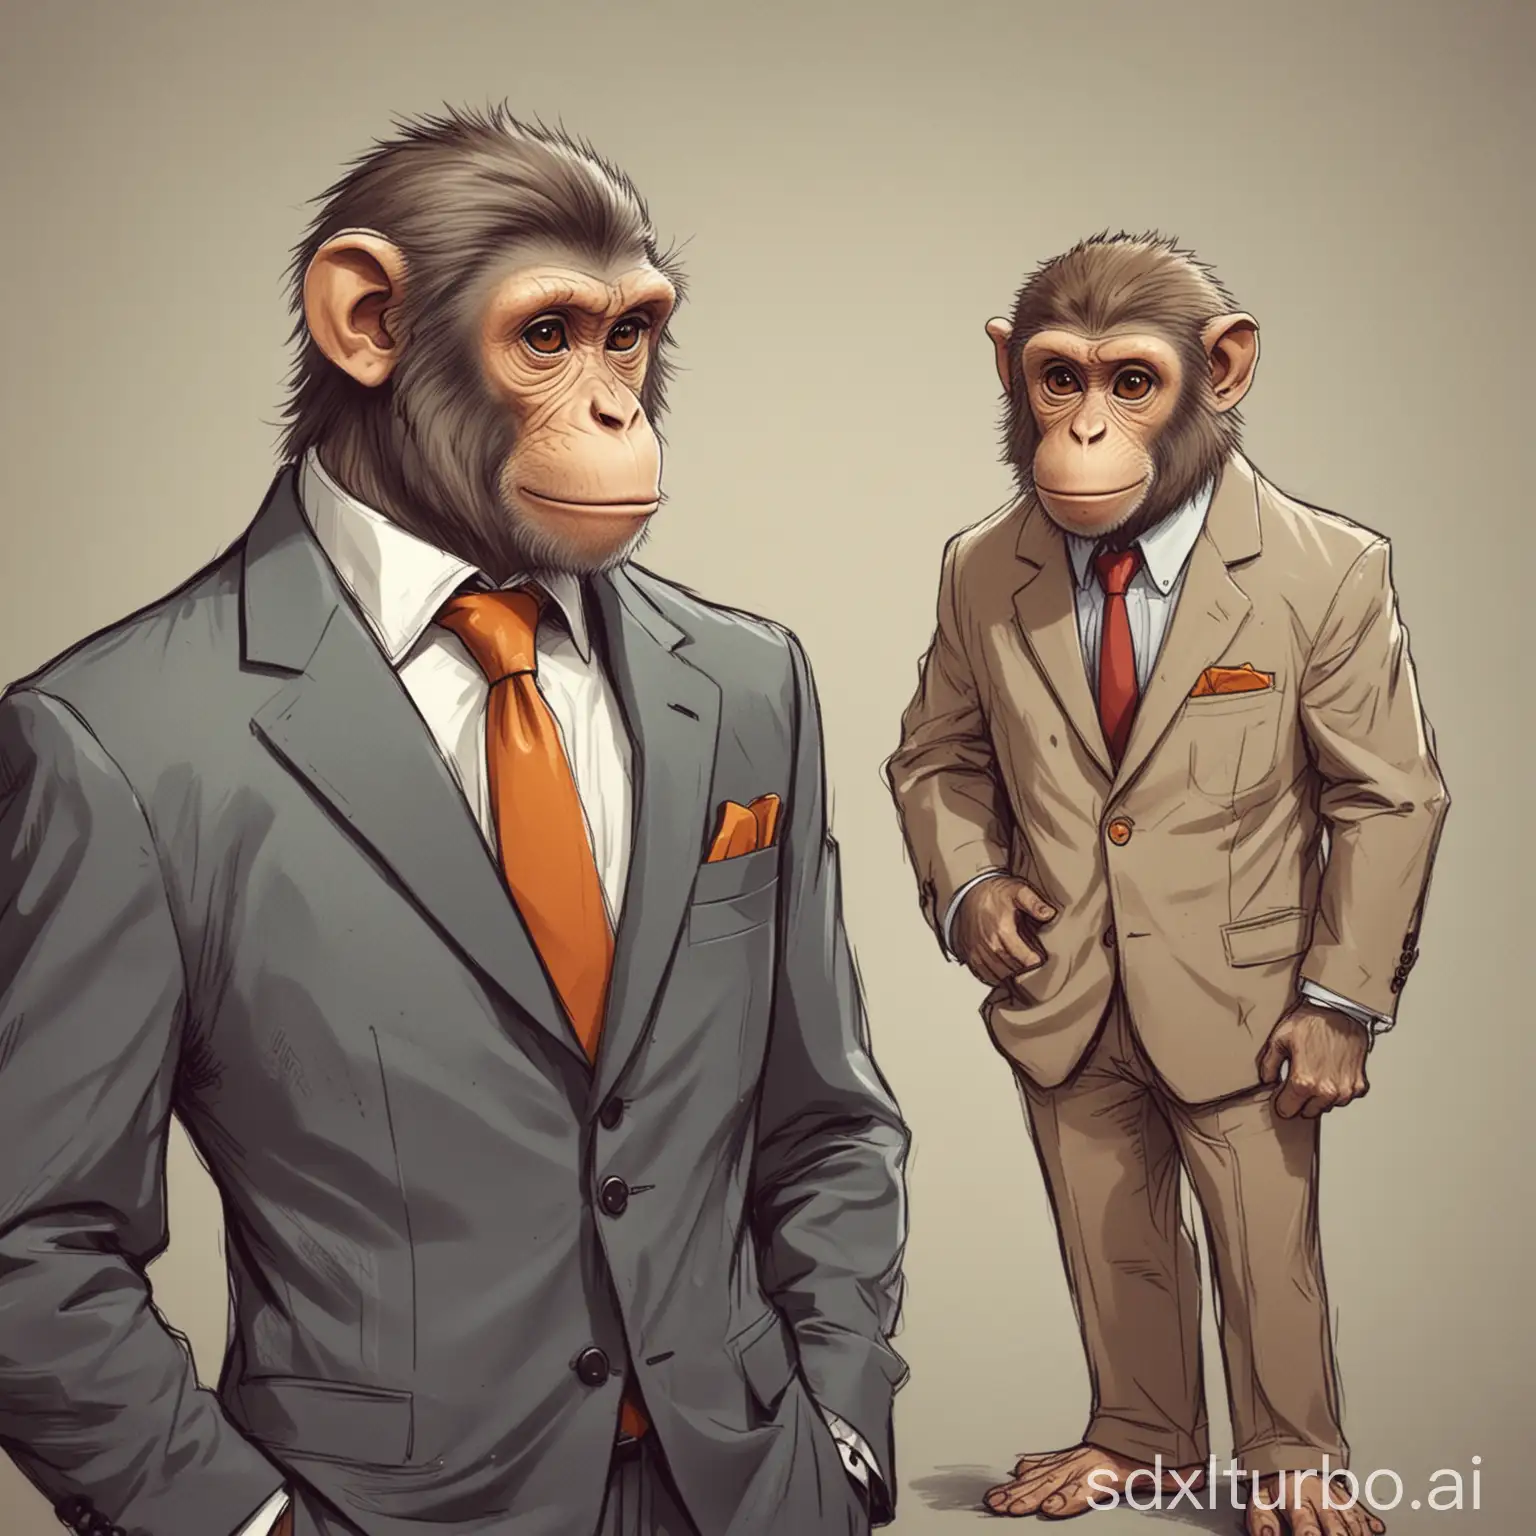 Draw a monkey curiously looking at a man wearing a suit, cartoon style